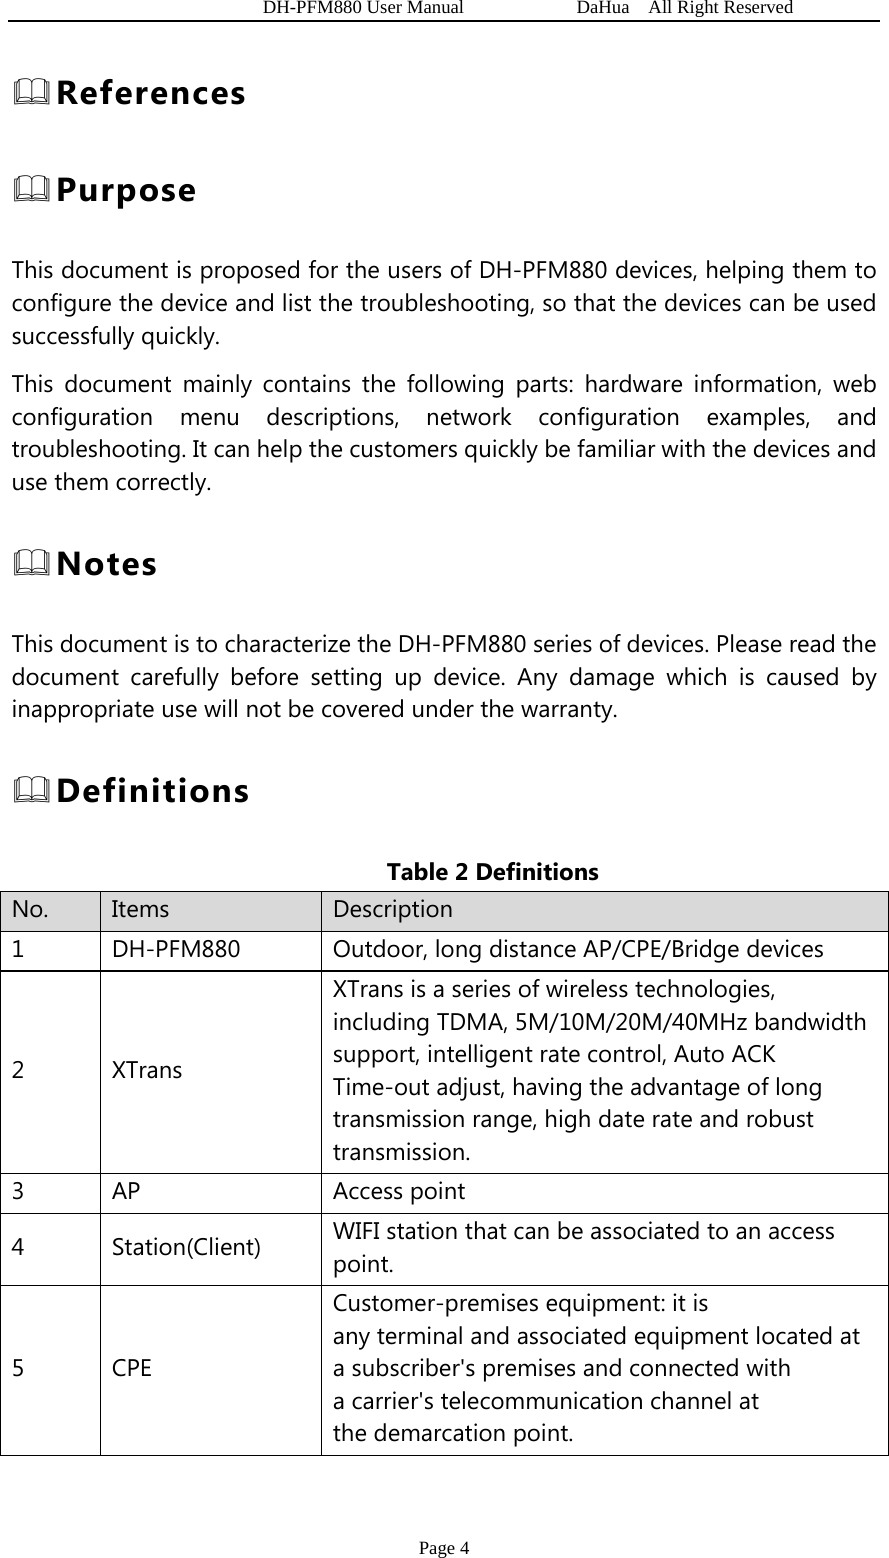   DH-PFM880 User Manual            DaHua  All Right Reserved Page 4  References  Purpose This document is proposed for the users of DH-PFM880 devices, helping them to configure the device and list the troubleshooting, so that the devices can be used successfully quickly. This document mainly contains the following parts: hardware information, web configuration menu descriptions, network configuration examples, and troubleshooting. It can help the customers quickly be familiar with the devices and use them correctly.  Notes This document is to characterize the DH-PFM880 series of devices. Please read the document carefully before setting up device. Any damage which is caused by inappropriate use will not be covered under the warranty.  Definitions Table 2 Definitions   No.  Items  Description 1  DH-PFM880  Outdoor, long distance AP/CPE/Bridge devices   2 XTrans XTrans is a series of wireless technologies, including TDMA, 5M/10M/20M/40MHz bandwidth support, intelligent rate control, Auto ACK Time-out adjust, having the advantage of long transmission range, high date rate and robust transmission. 3 AP  Access point 4 Station(Client) WIFI station that can be associated to an access point. 5 CPE Customer-premises equipment: it is any terminal and associated equipment located at a subscriber&apos;s premises and connected with a carrier&apos;s telecommunication channel at the demarcation point.  